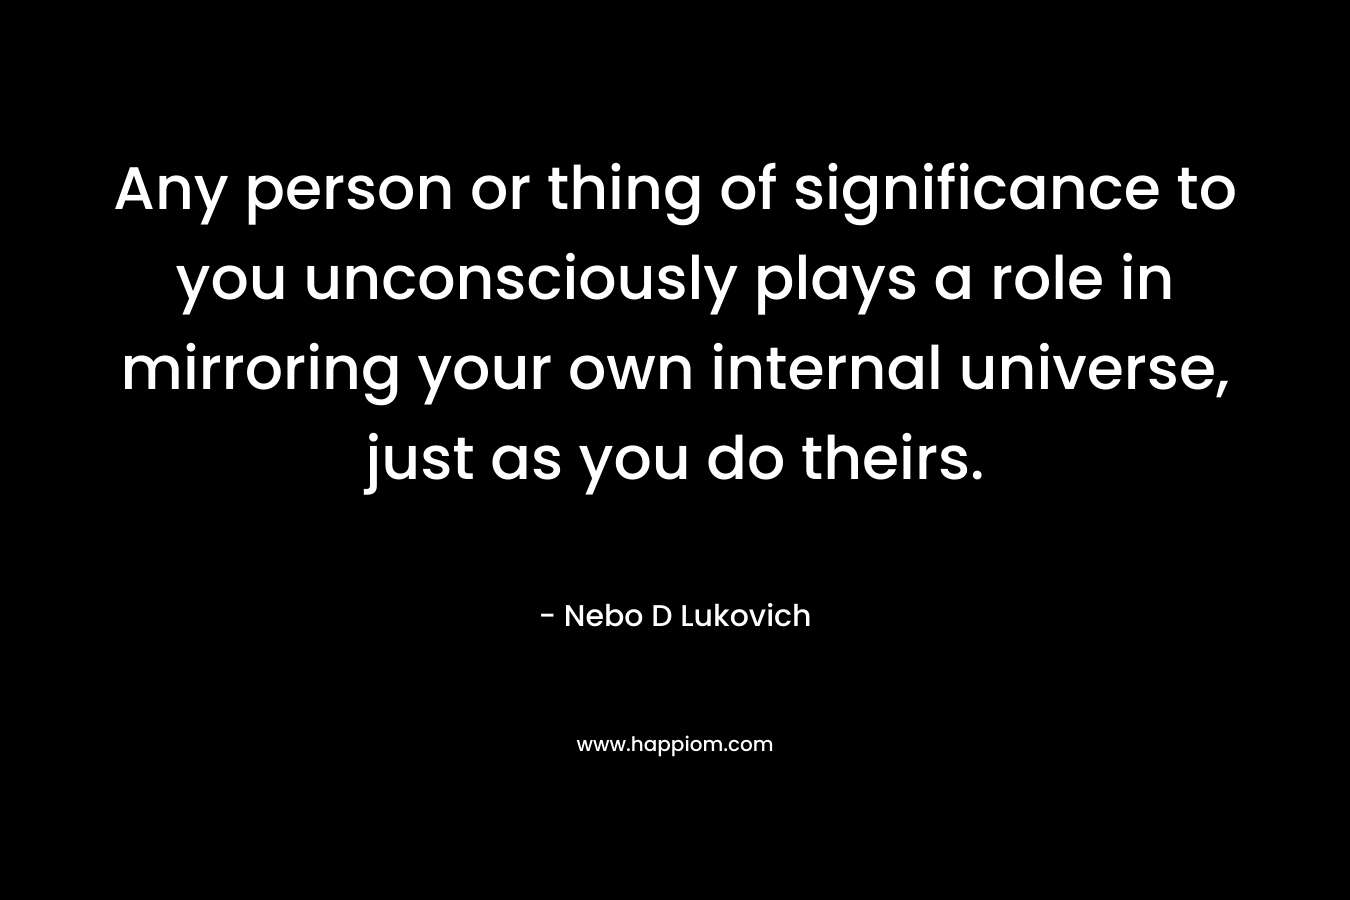 Any person or thing of significance to you unconsciously plays a role in mirroring your own internal universe, just as you do theirs. – Nebo D Lukovich